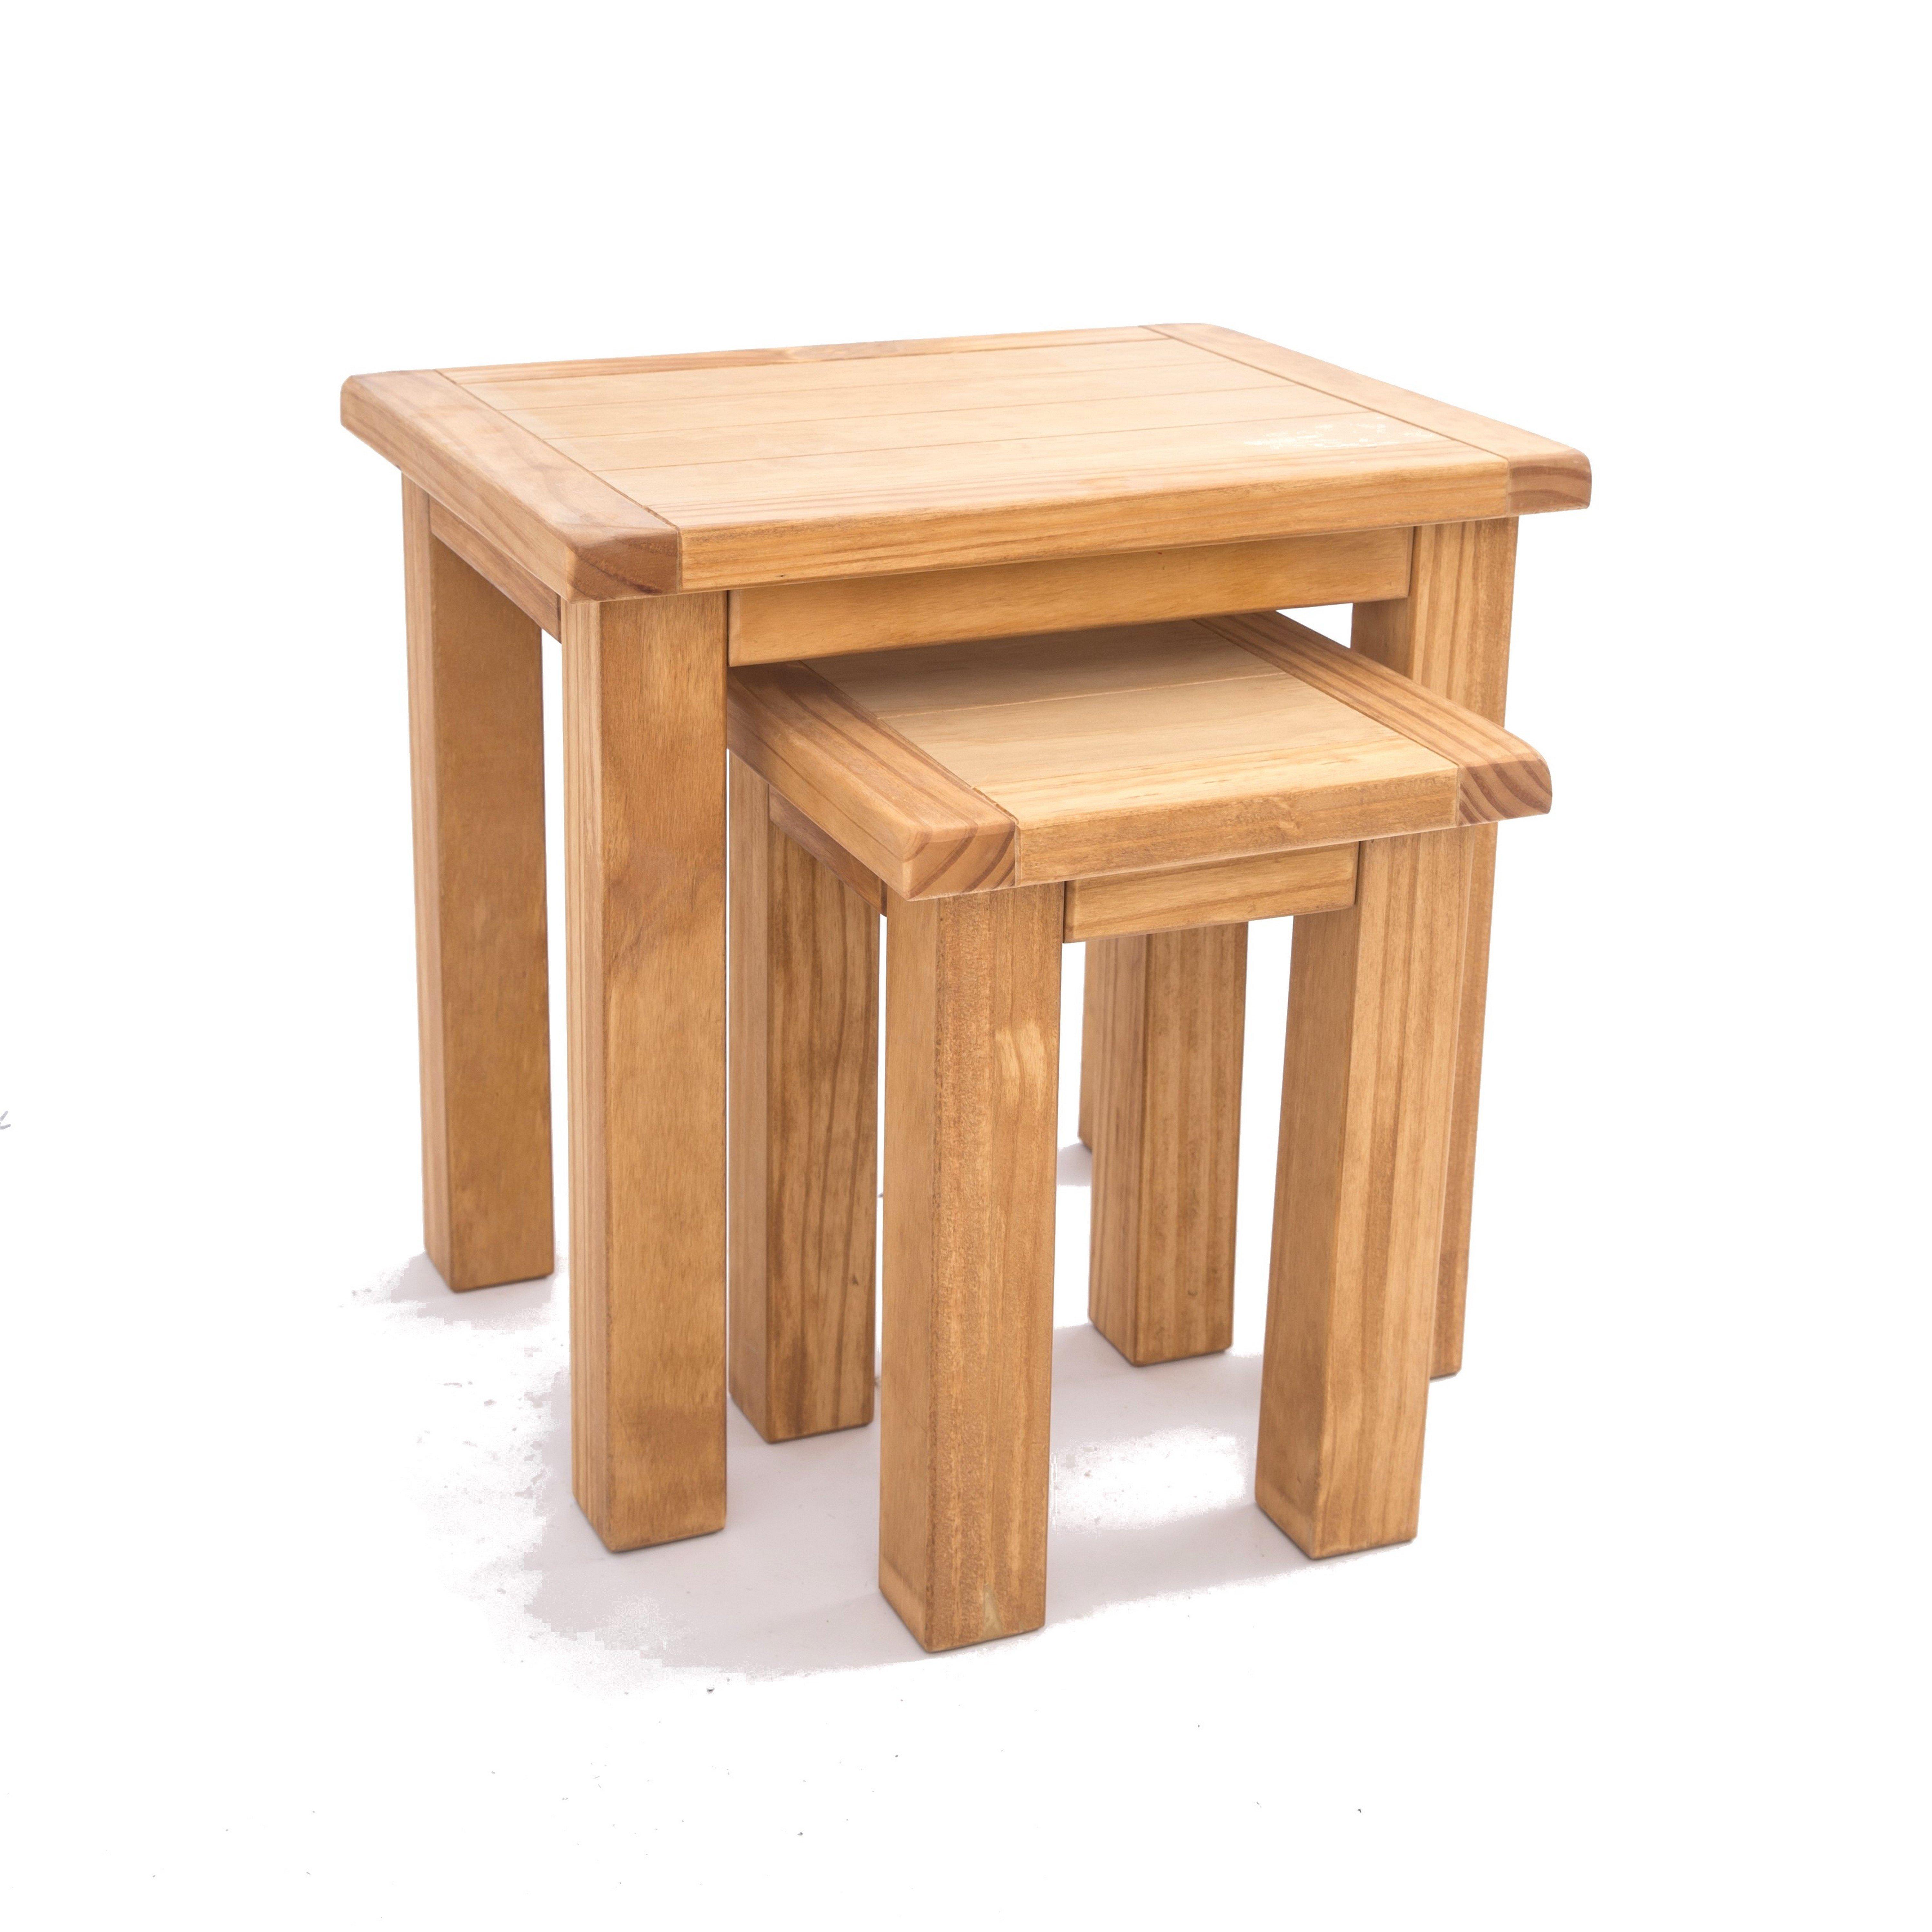 Nest of Tables - Set of 2 Tables